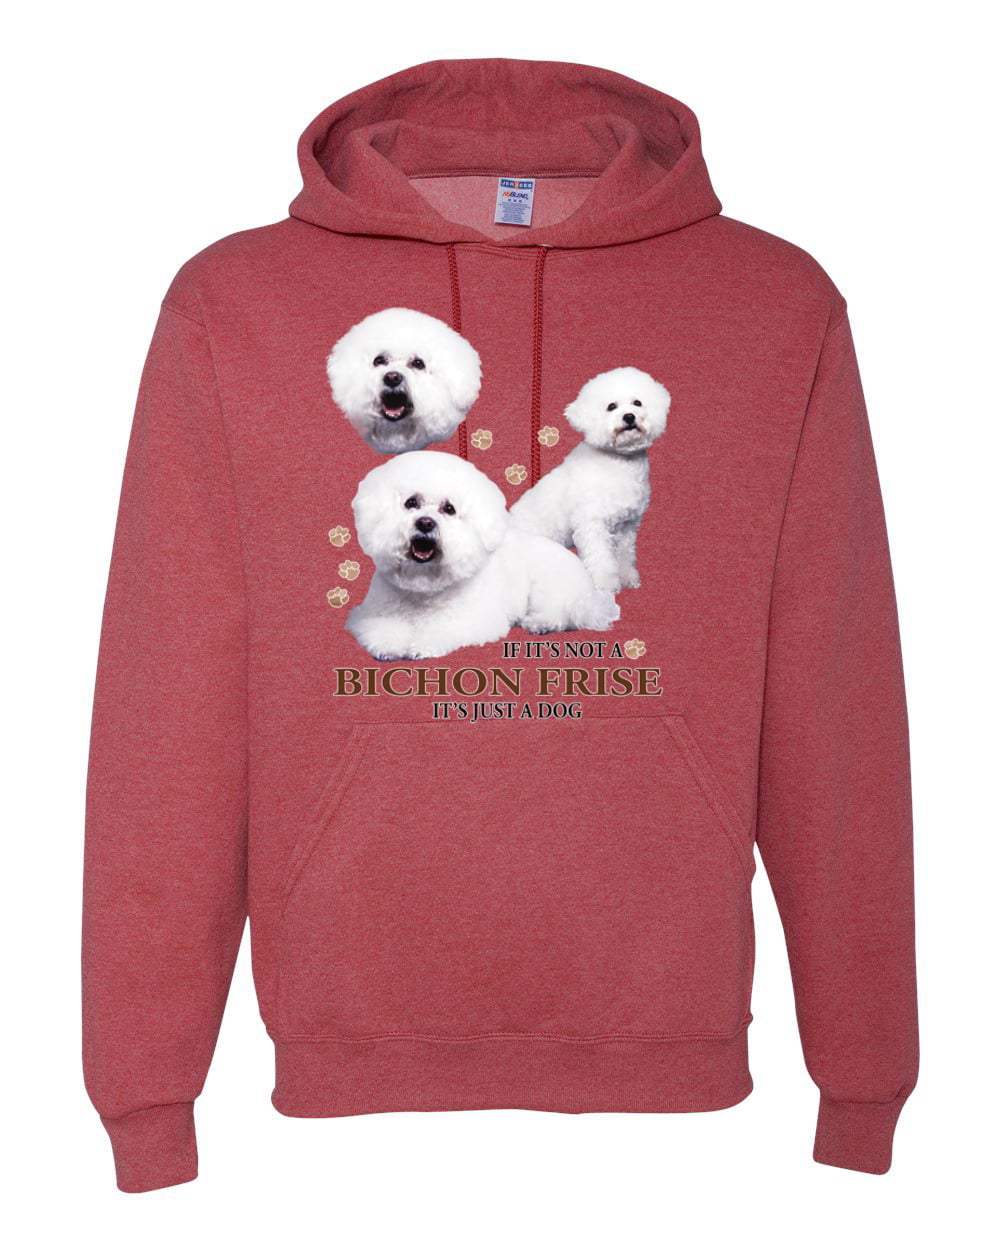 The Best Therapy is Bichon Fris‚ Dog Funny Gifts for Pet Lover Sweatshirt 